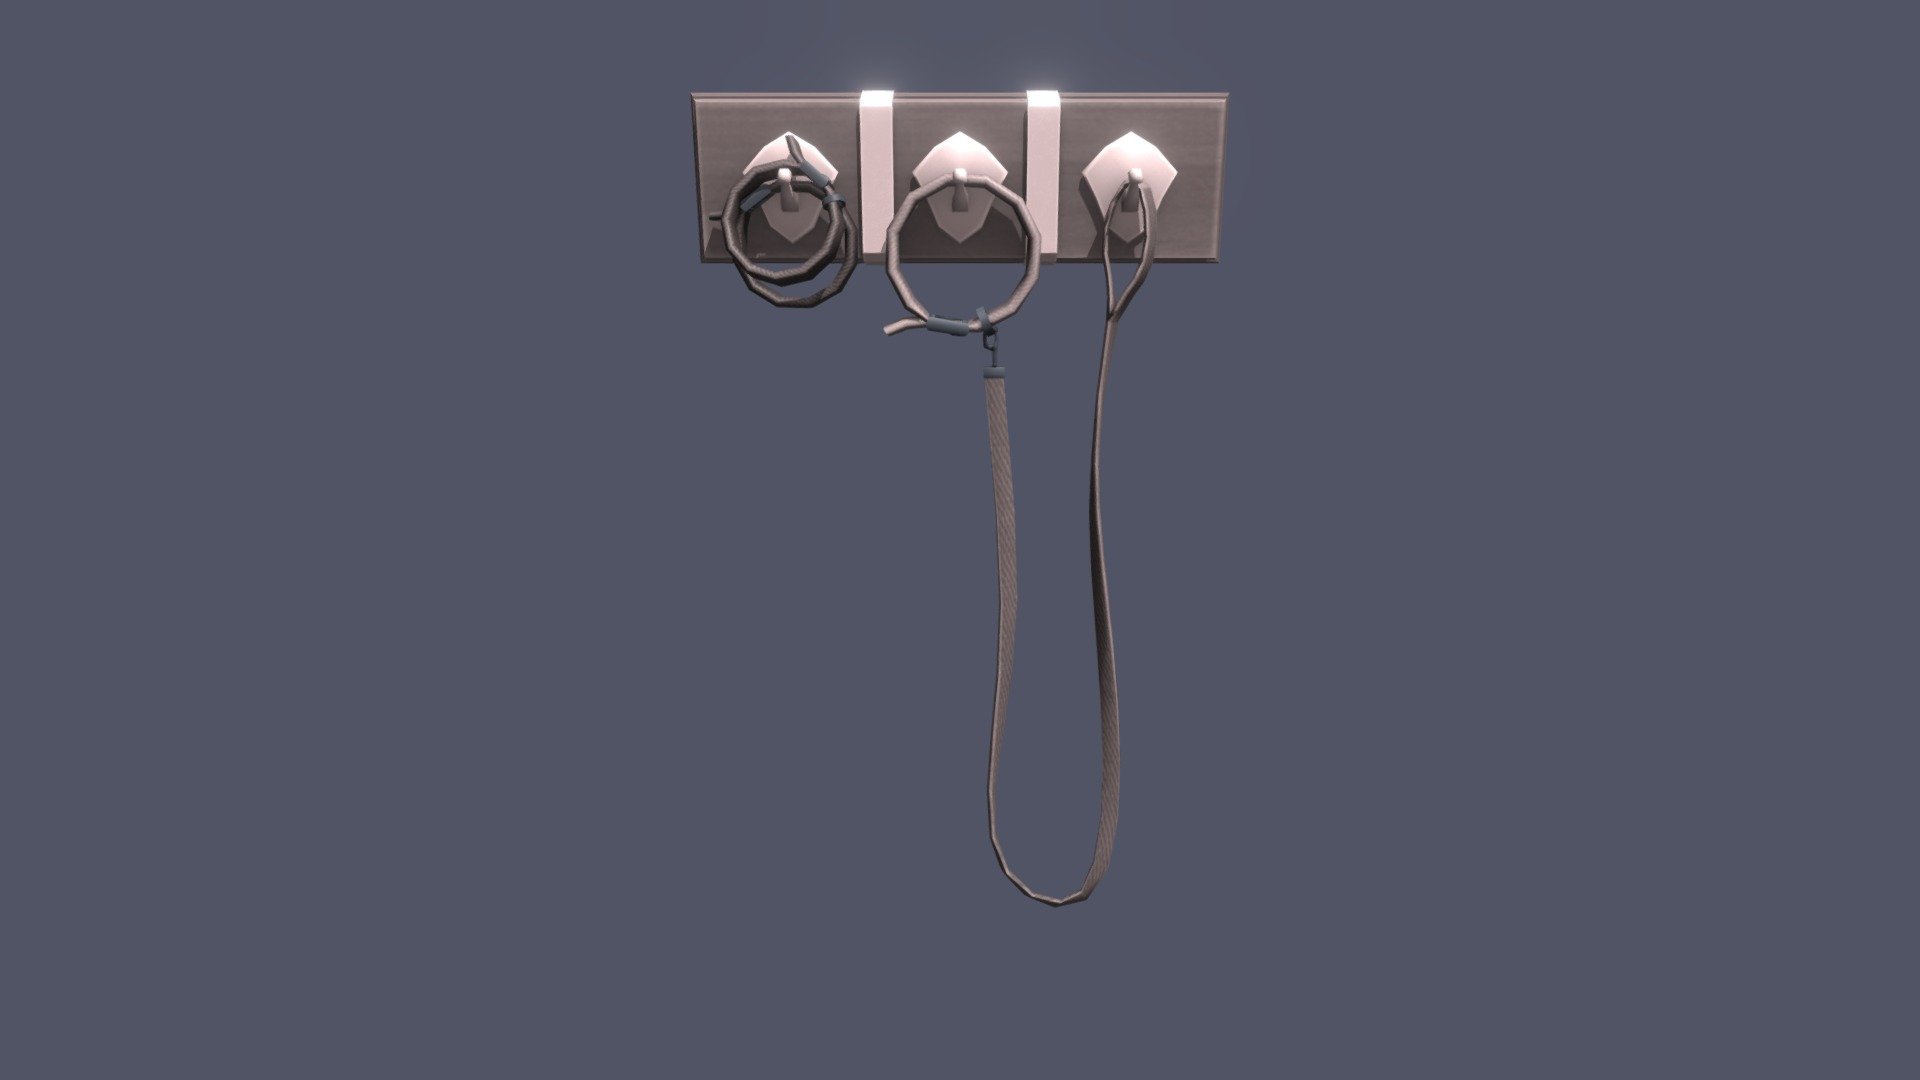 Testing Baked Maps

Hang those dog collars up - Low Poly Collar Hanger - 3D model by Henslock 3d model